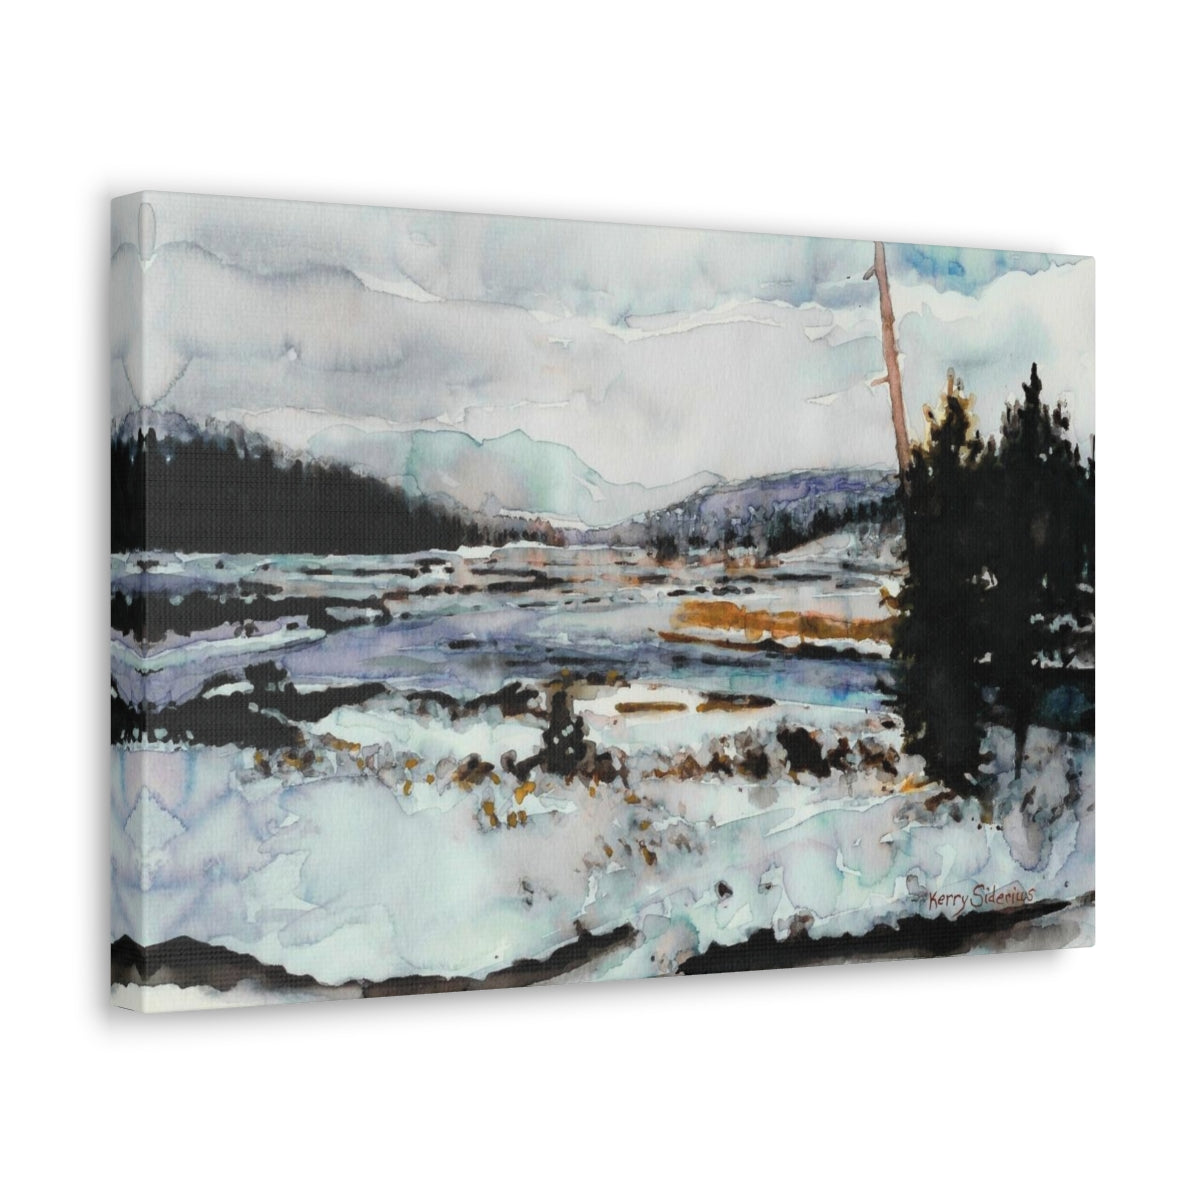 "Snowy Methow Scene" Wrapped Canvas (3 Sizes) - Kerry Siderius Art 